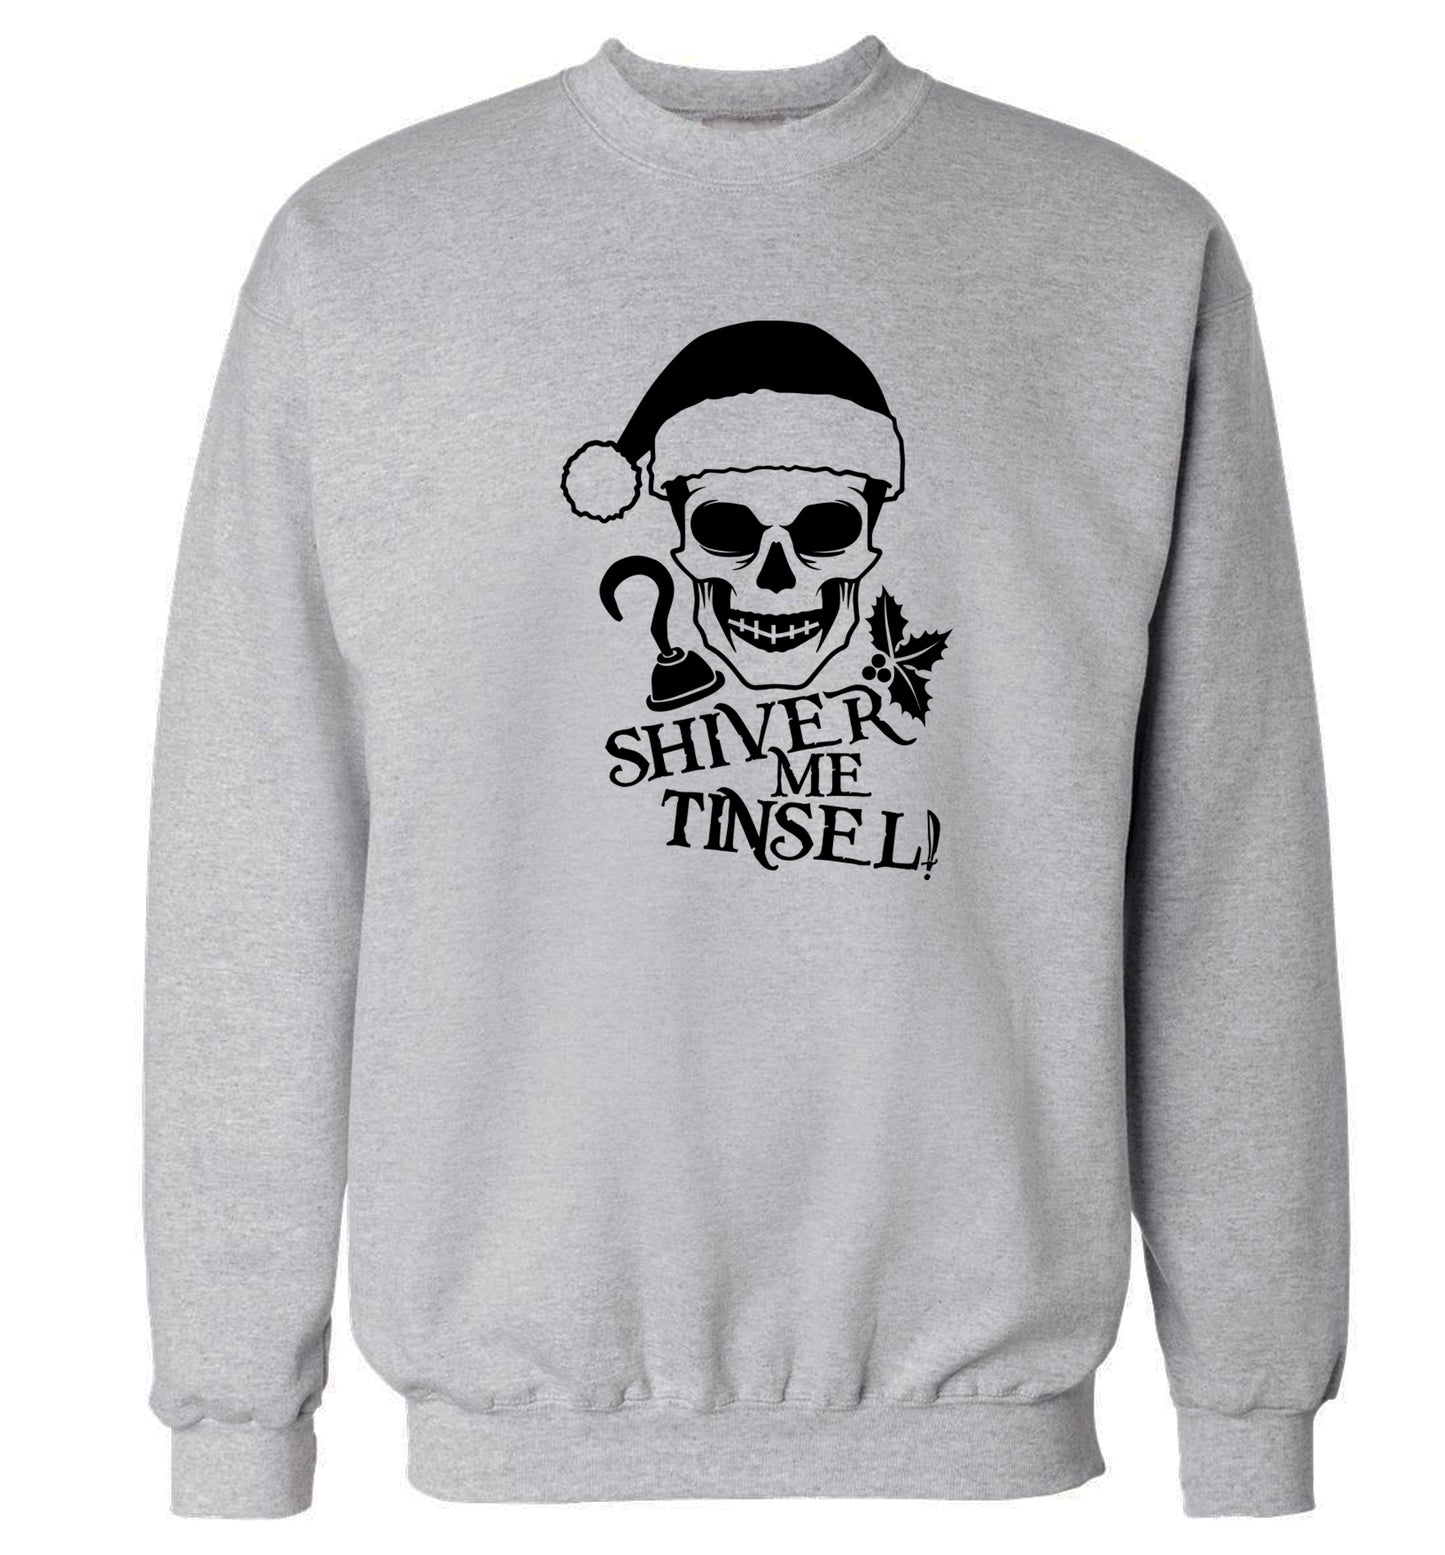 Shiver me tinsel Adult's unisex grey Sweater 2XL